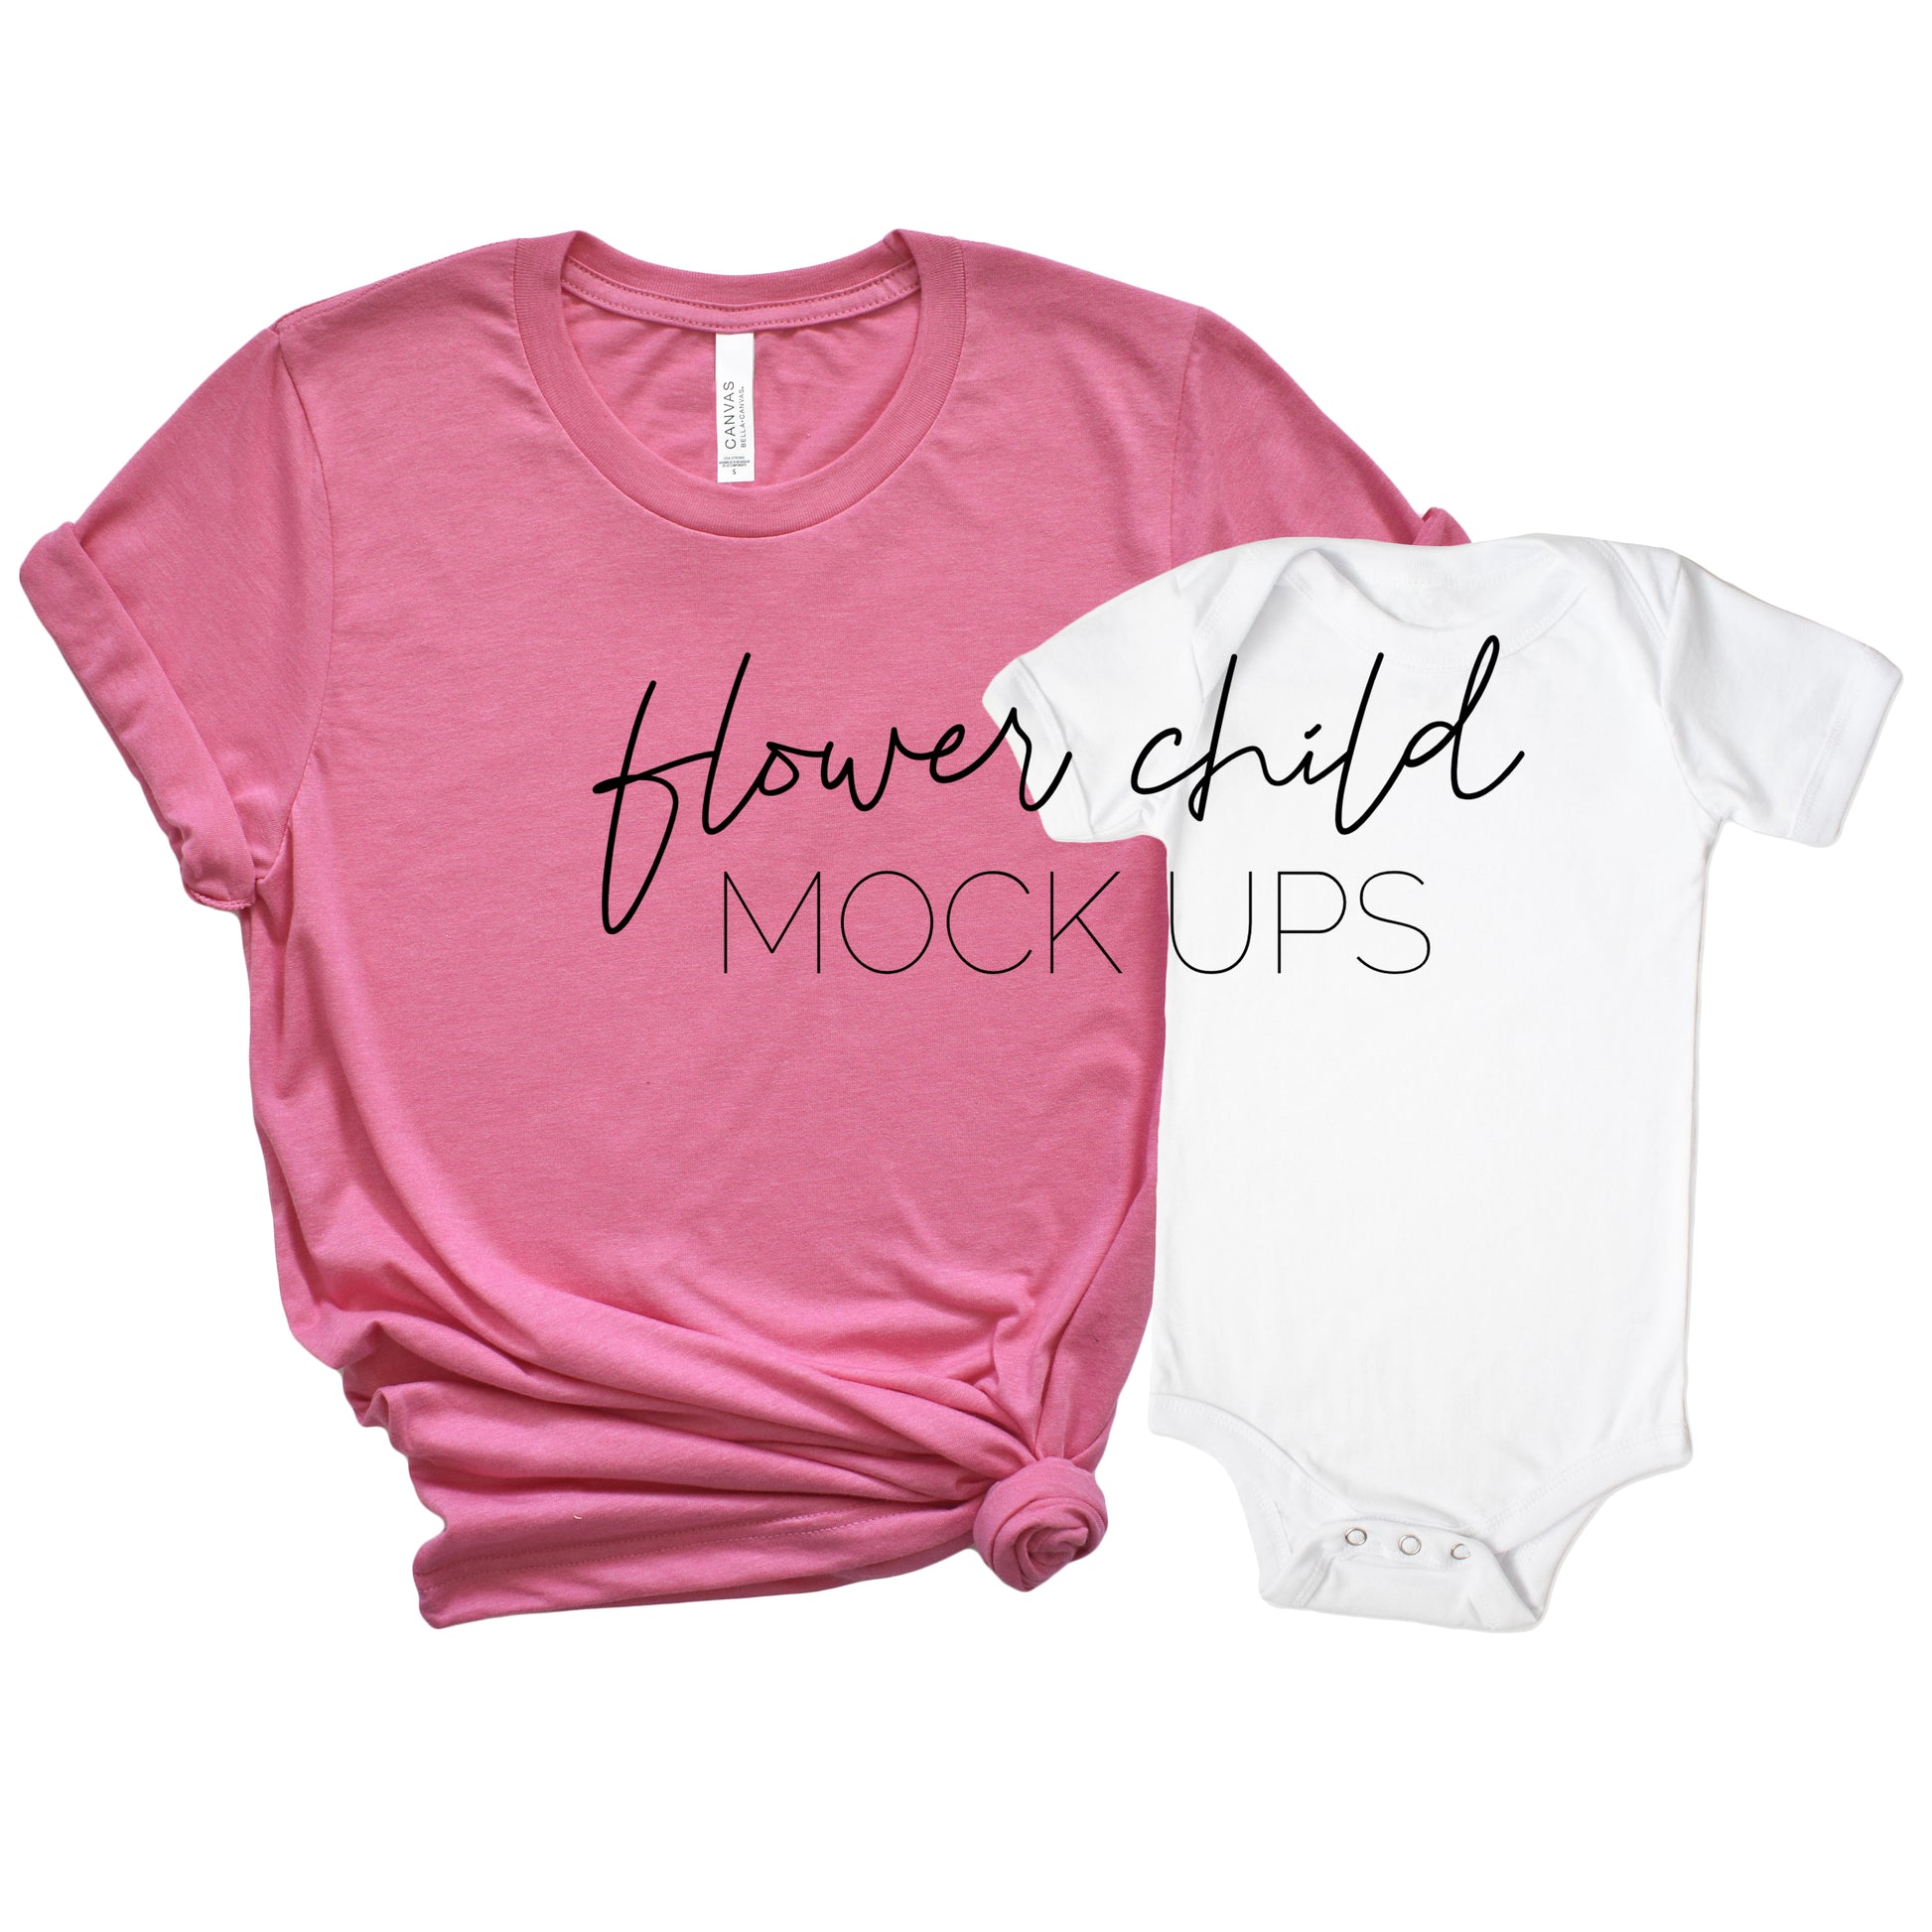 Bella Canvas 3001 Charity Pink Mommy and Me Mockup - flowerchildmockups